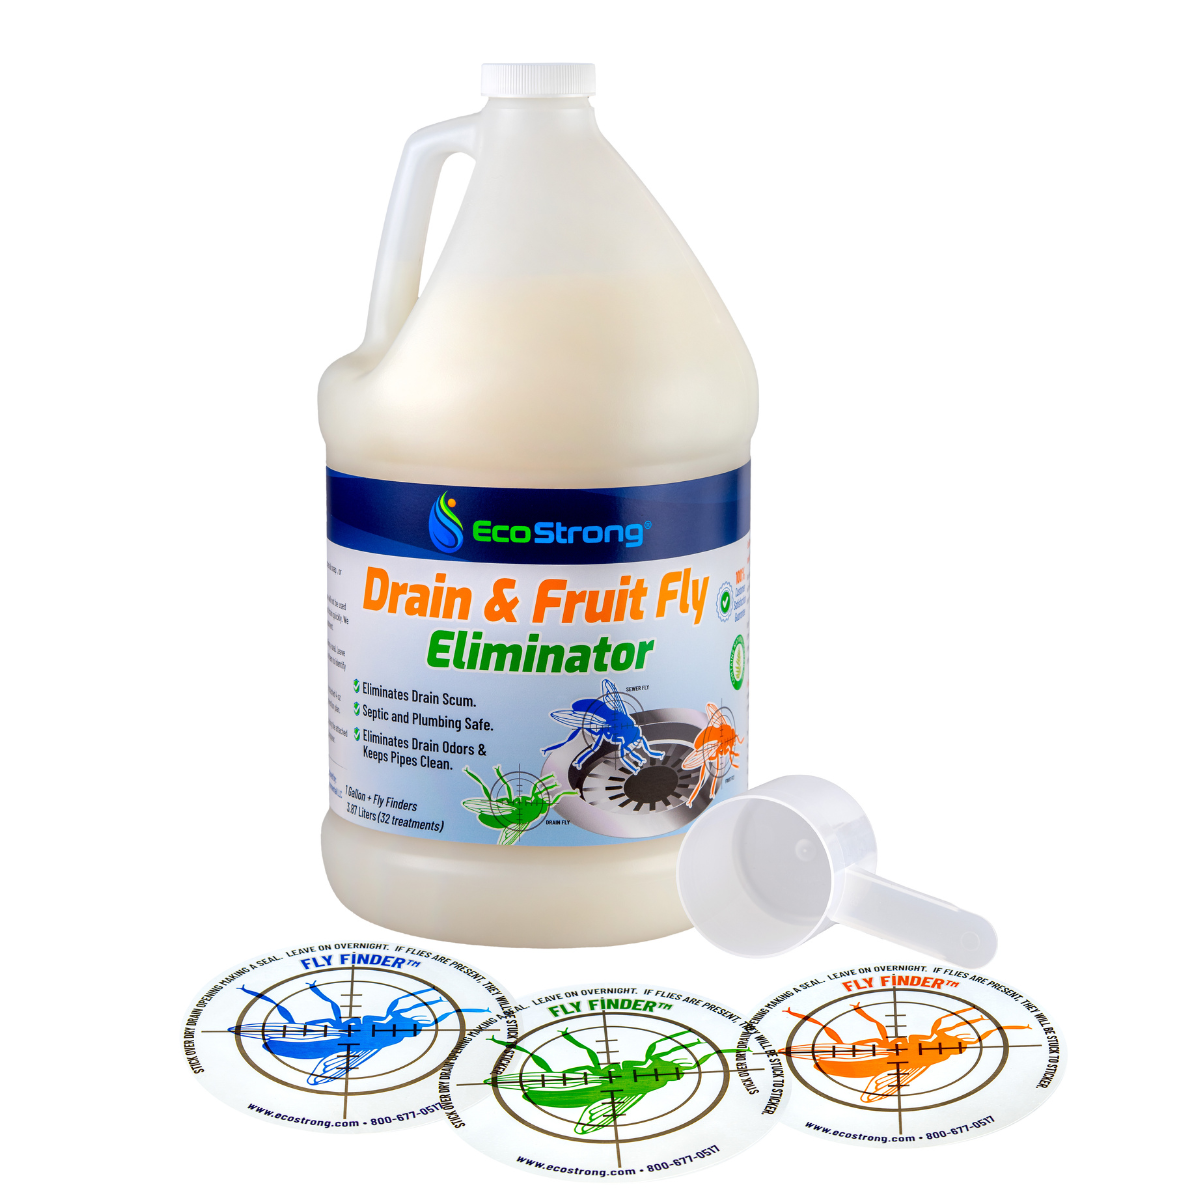 EcoStrong Drain and Fruit Fly Eliminator 1 Gallon #size_1-gallon-with-3-fly-finder-traps